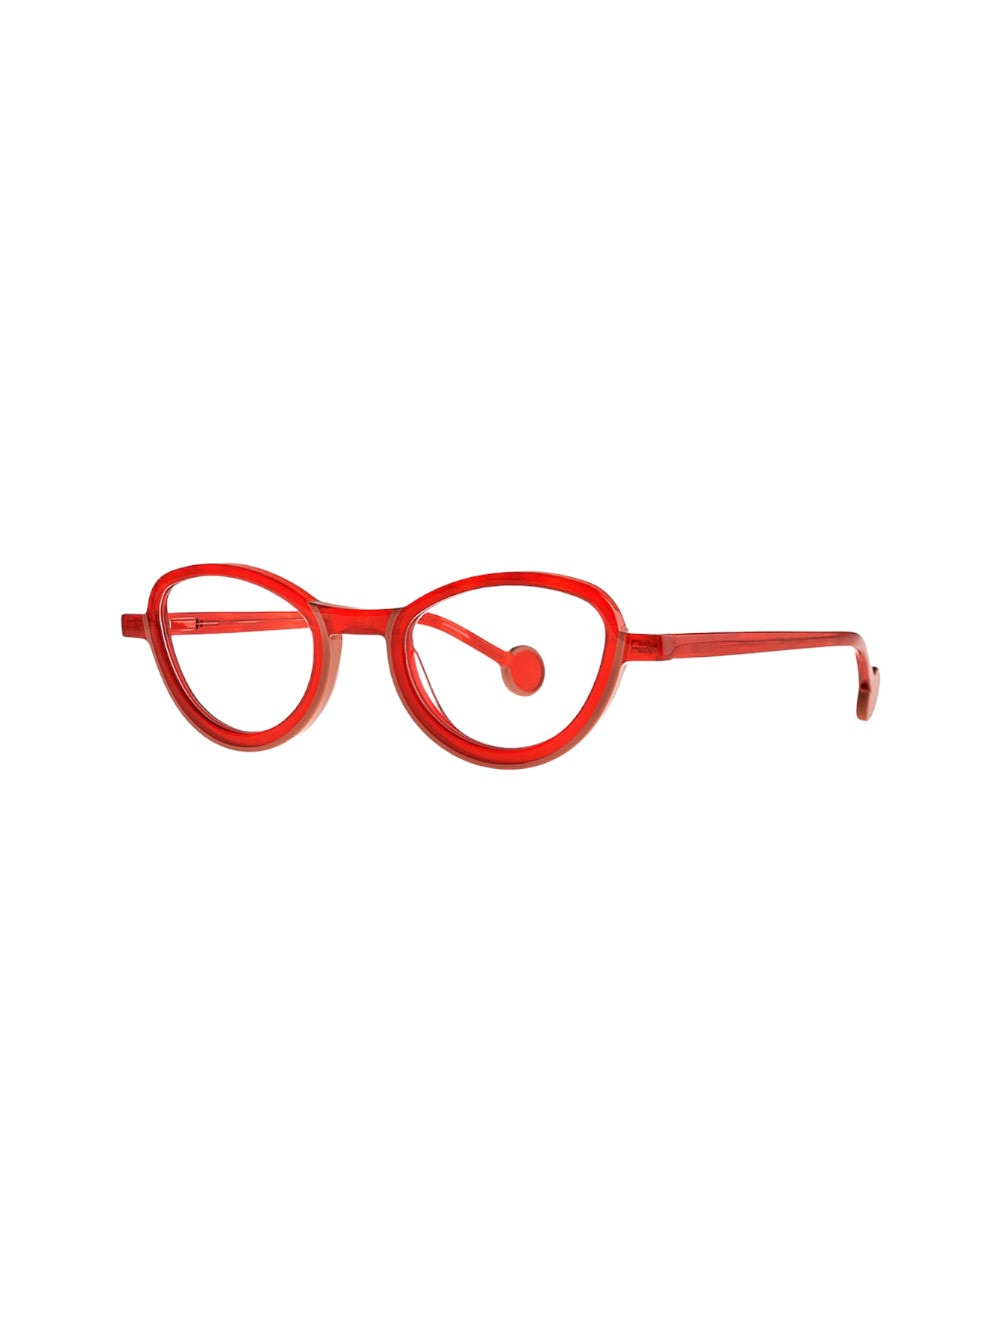 Theo Swing - Trasparent Red Glasses